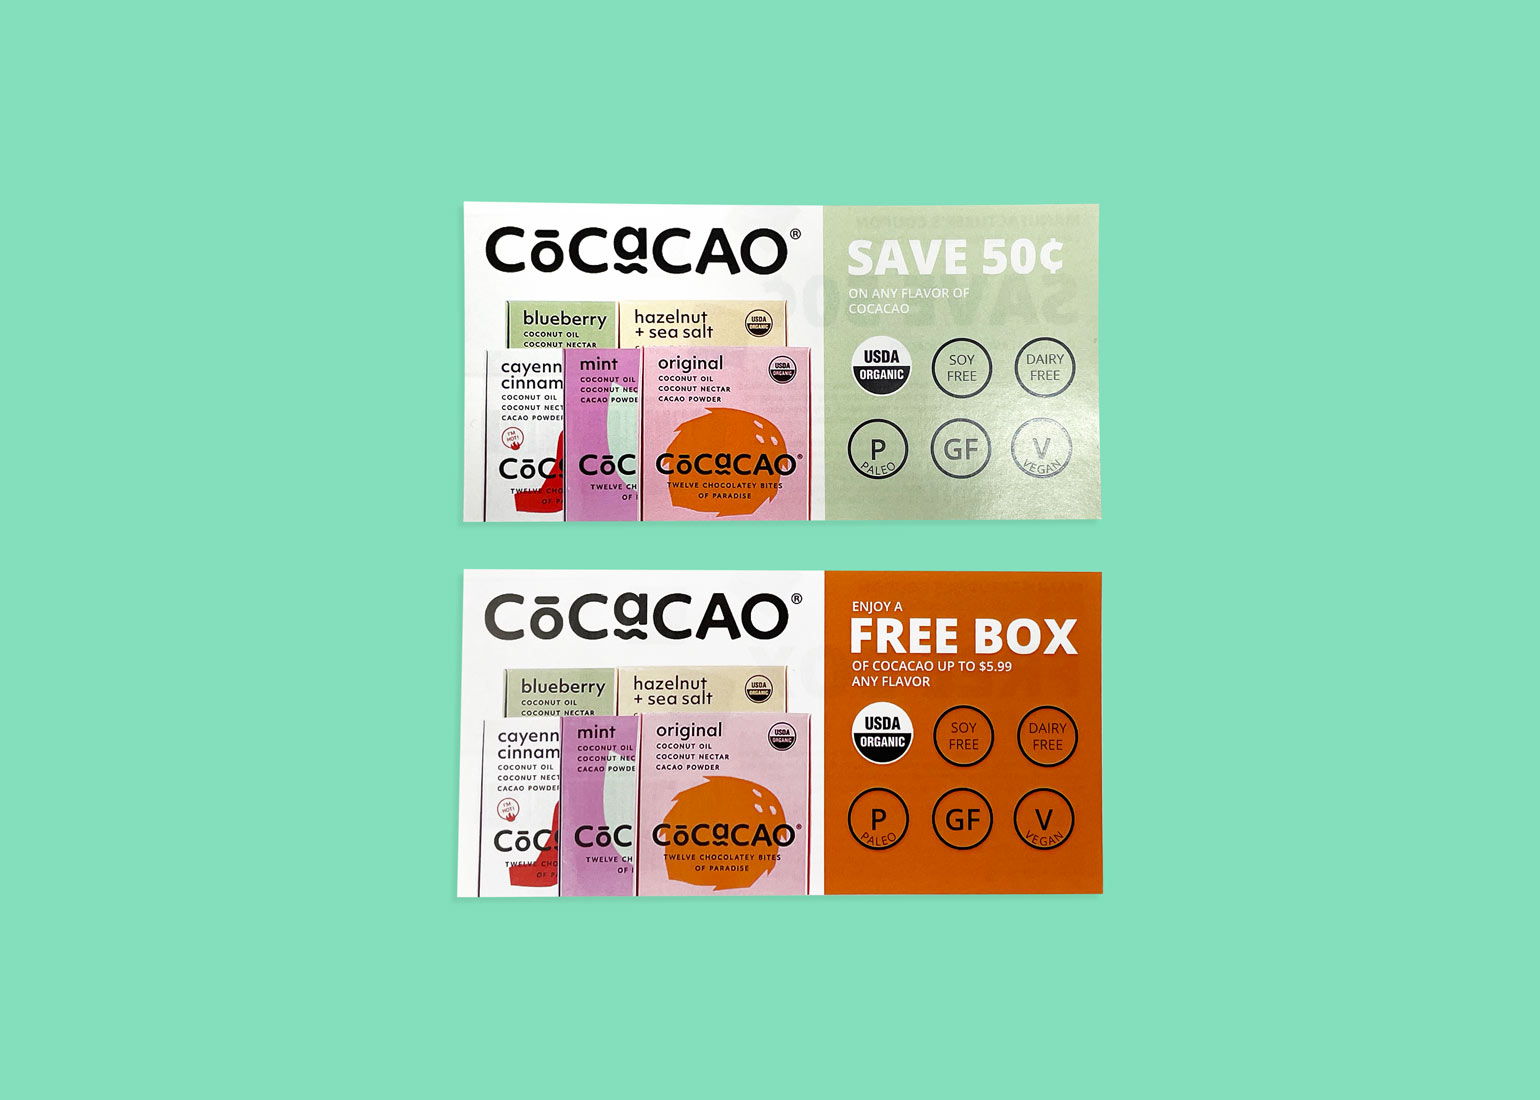 Cocacao Loose-Leaf Coupons